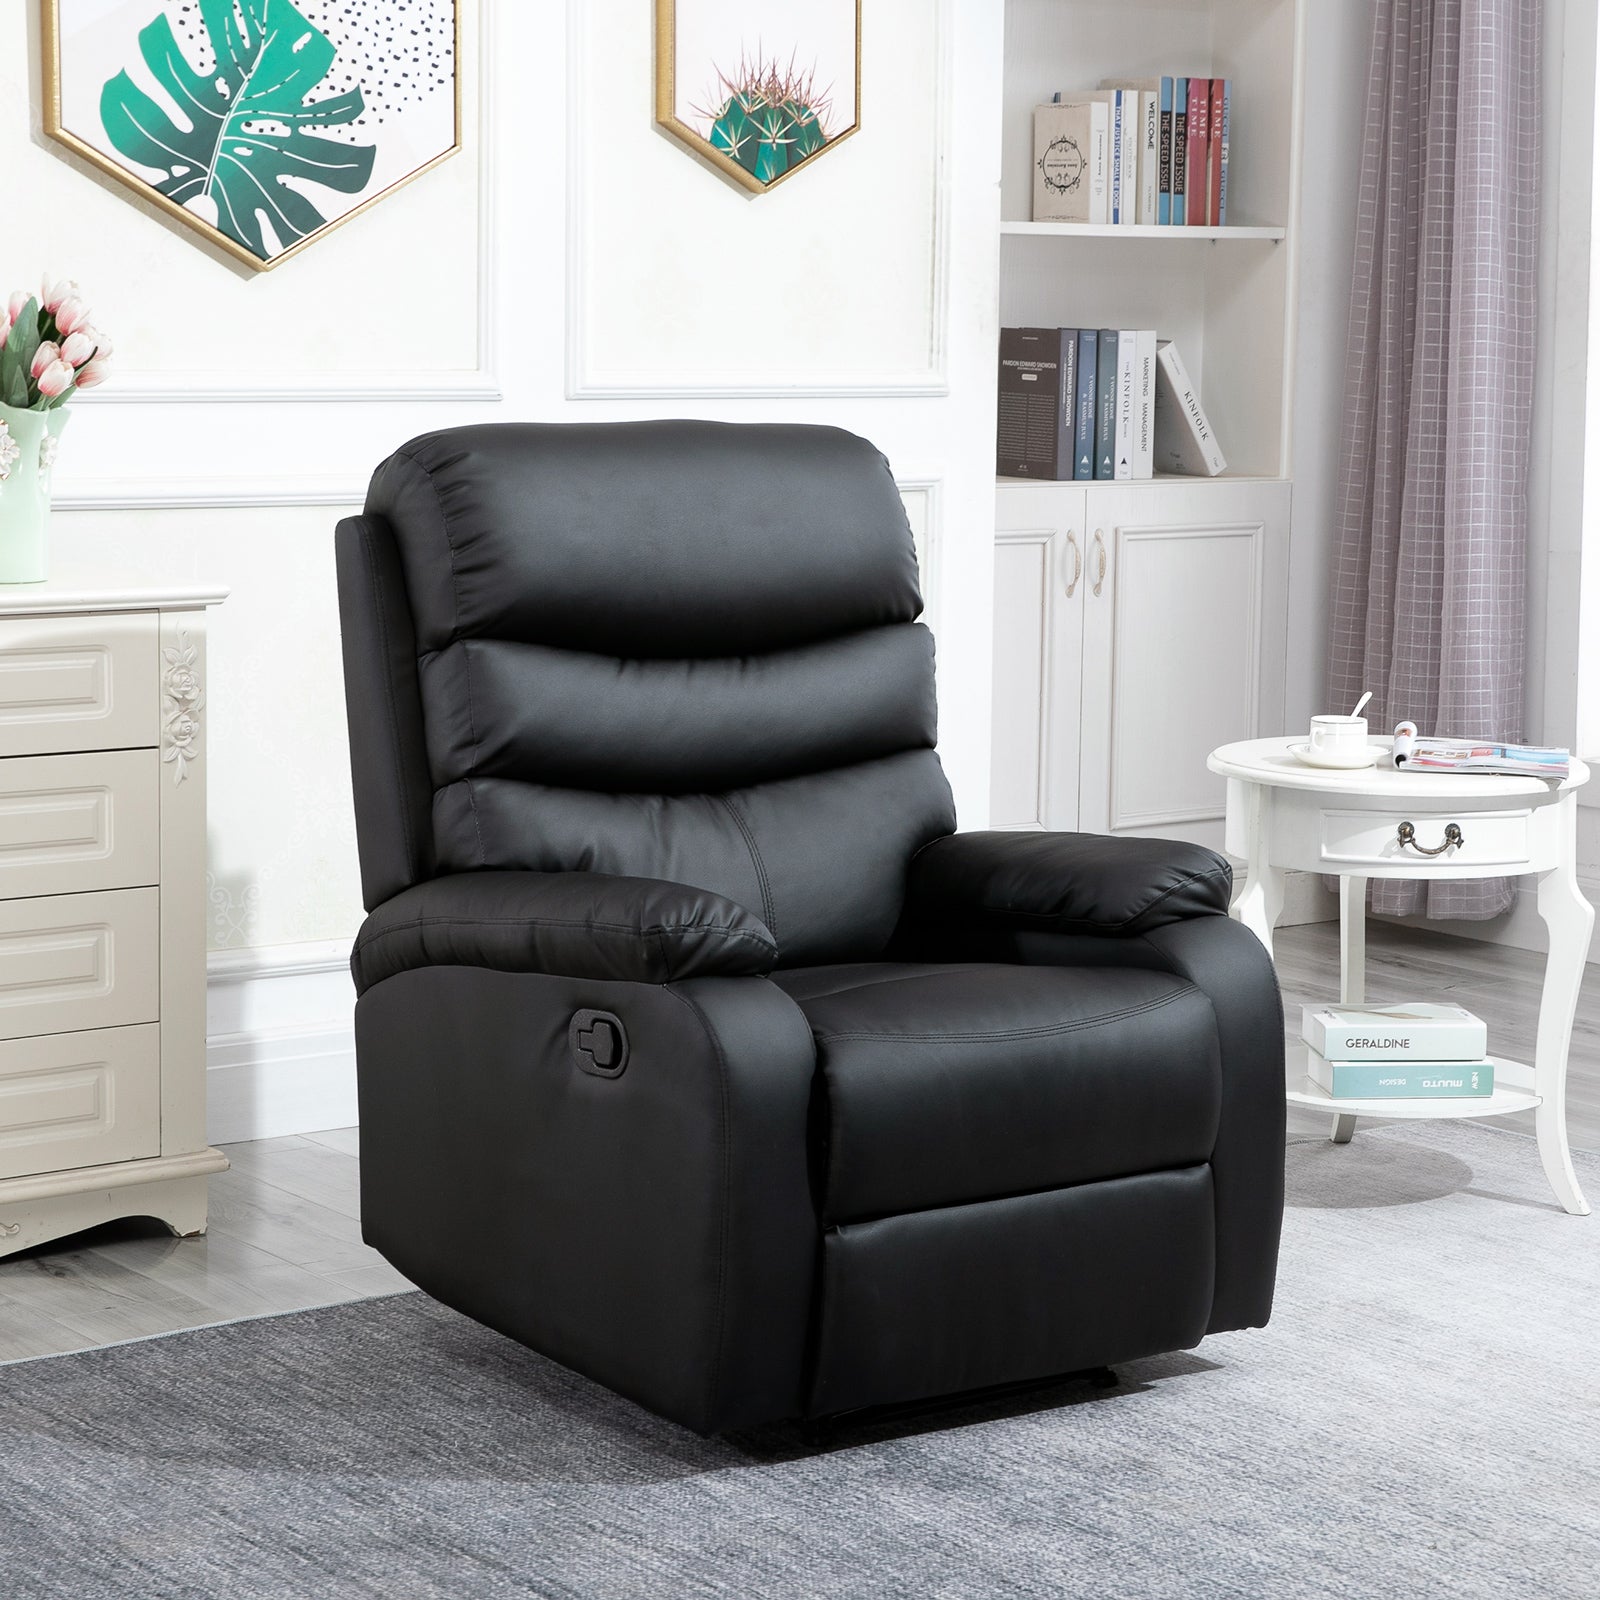 PU Leather Reclining Chair, Manual Recliner Chair with Padded Armrests, Retractable Footrest and Wood Frame, Black-1